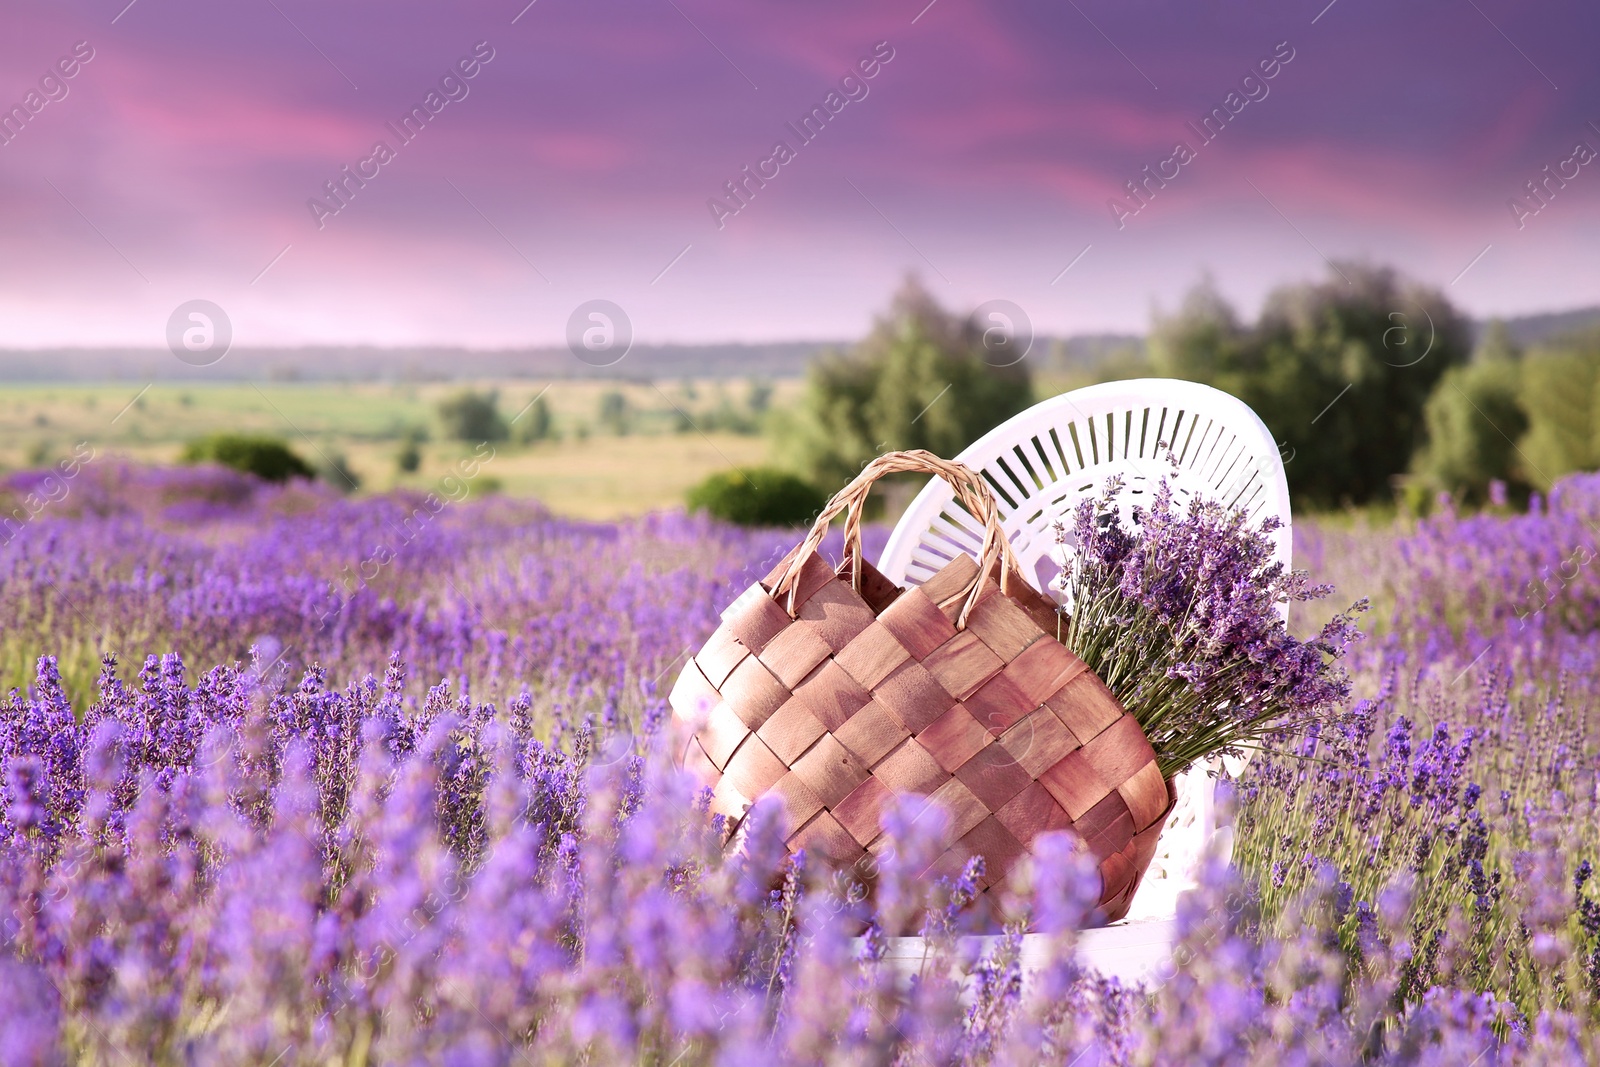 Image of Wicker bag with beautiful lavender flowers on chair in field outdoors at sunset